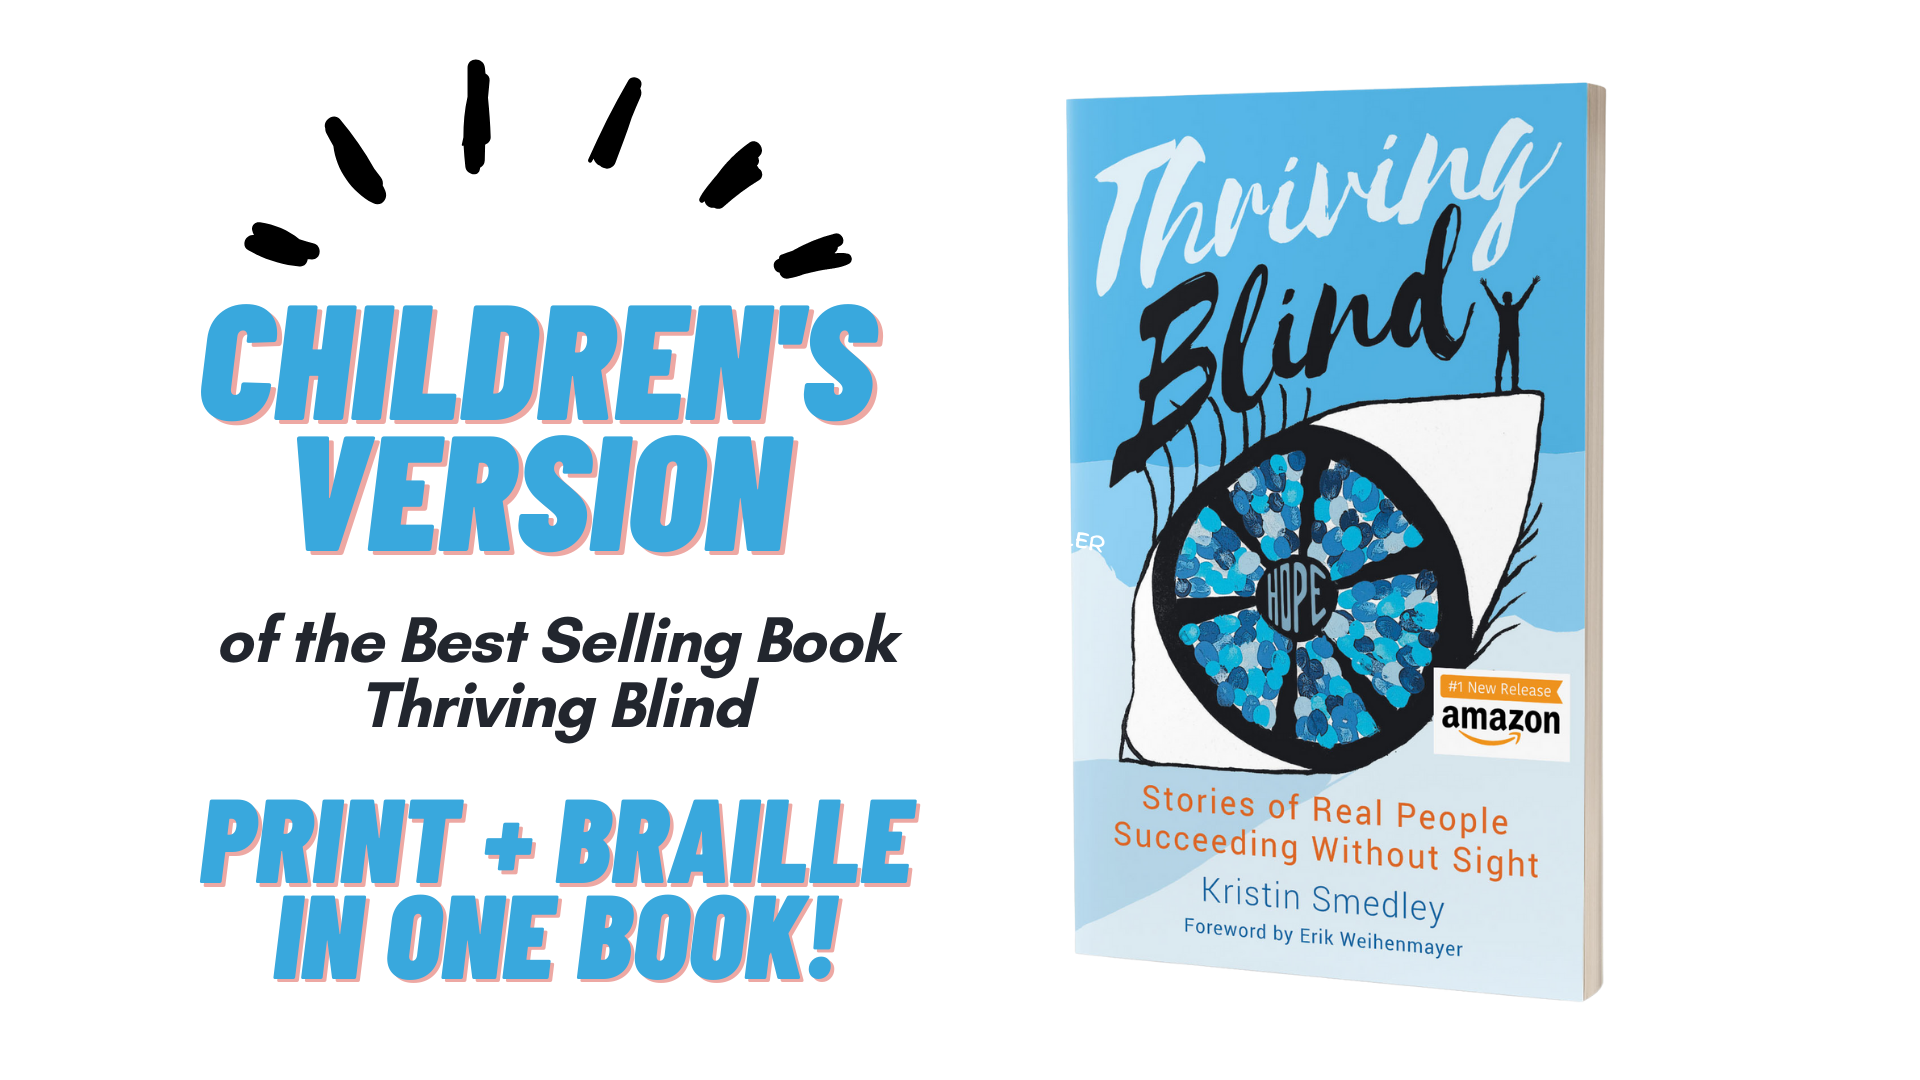 thriving blind book and text says the childrens version in print and braille is coming soon